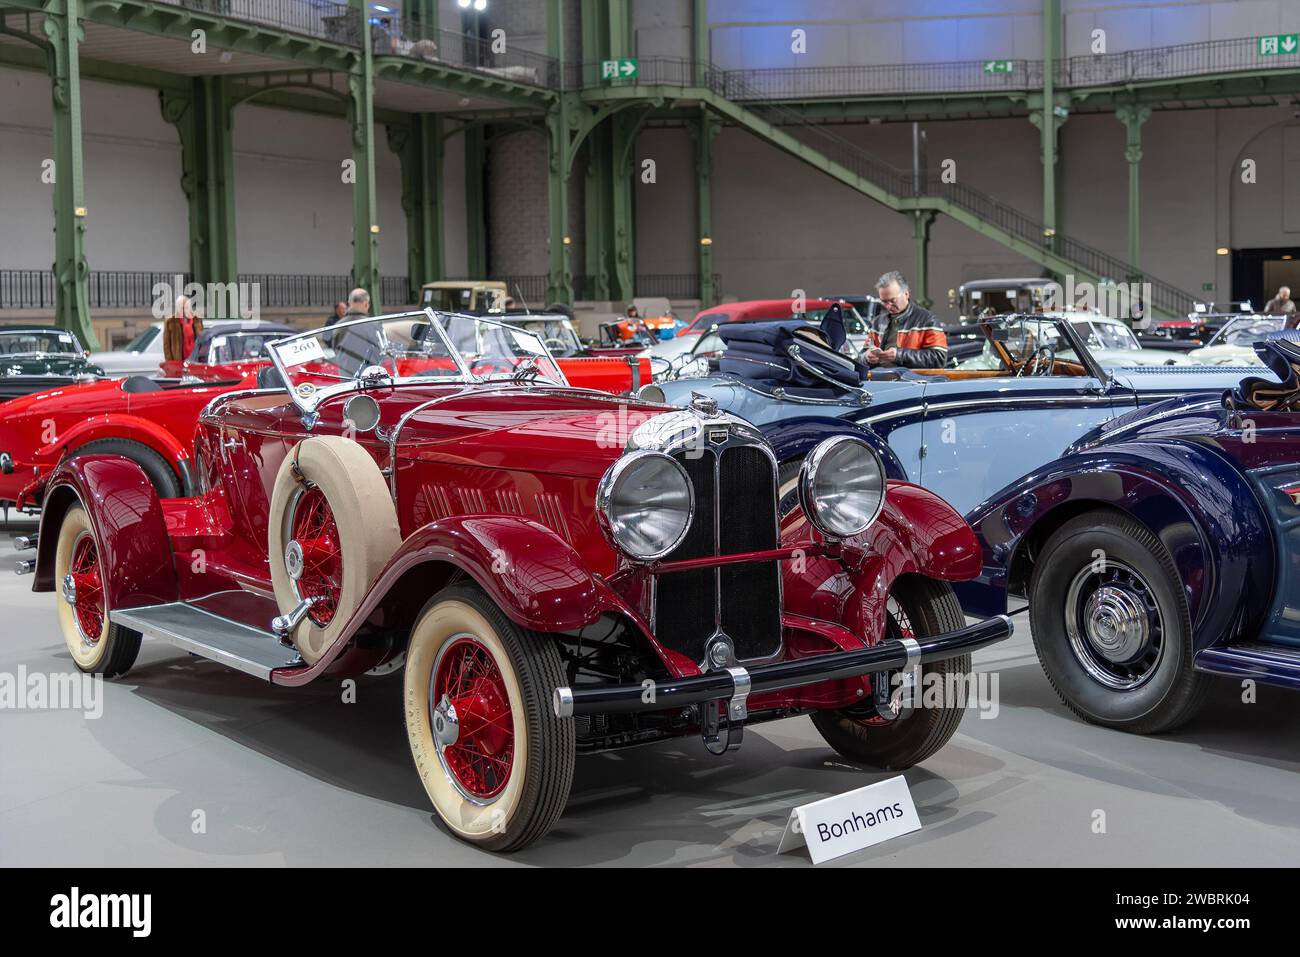 Paris, France - Bonhams 2020 sale at the Grand Palais in Paris. Focus on a red 1928 Auburn Model 88 Boattail Speedster. Chassis no. 88 1306. Stock Photo